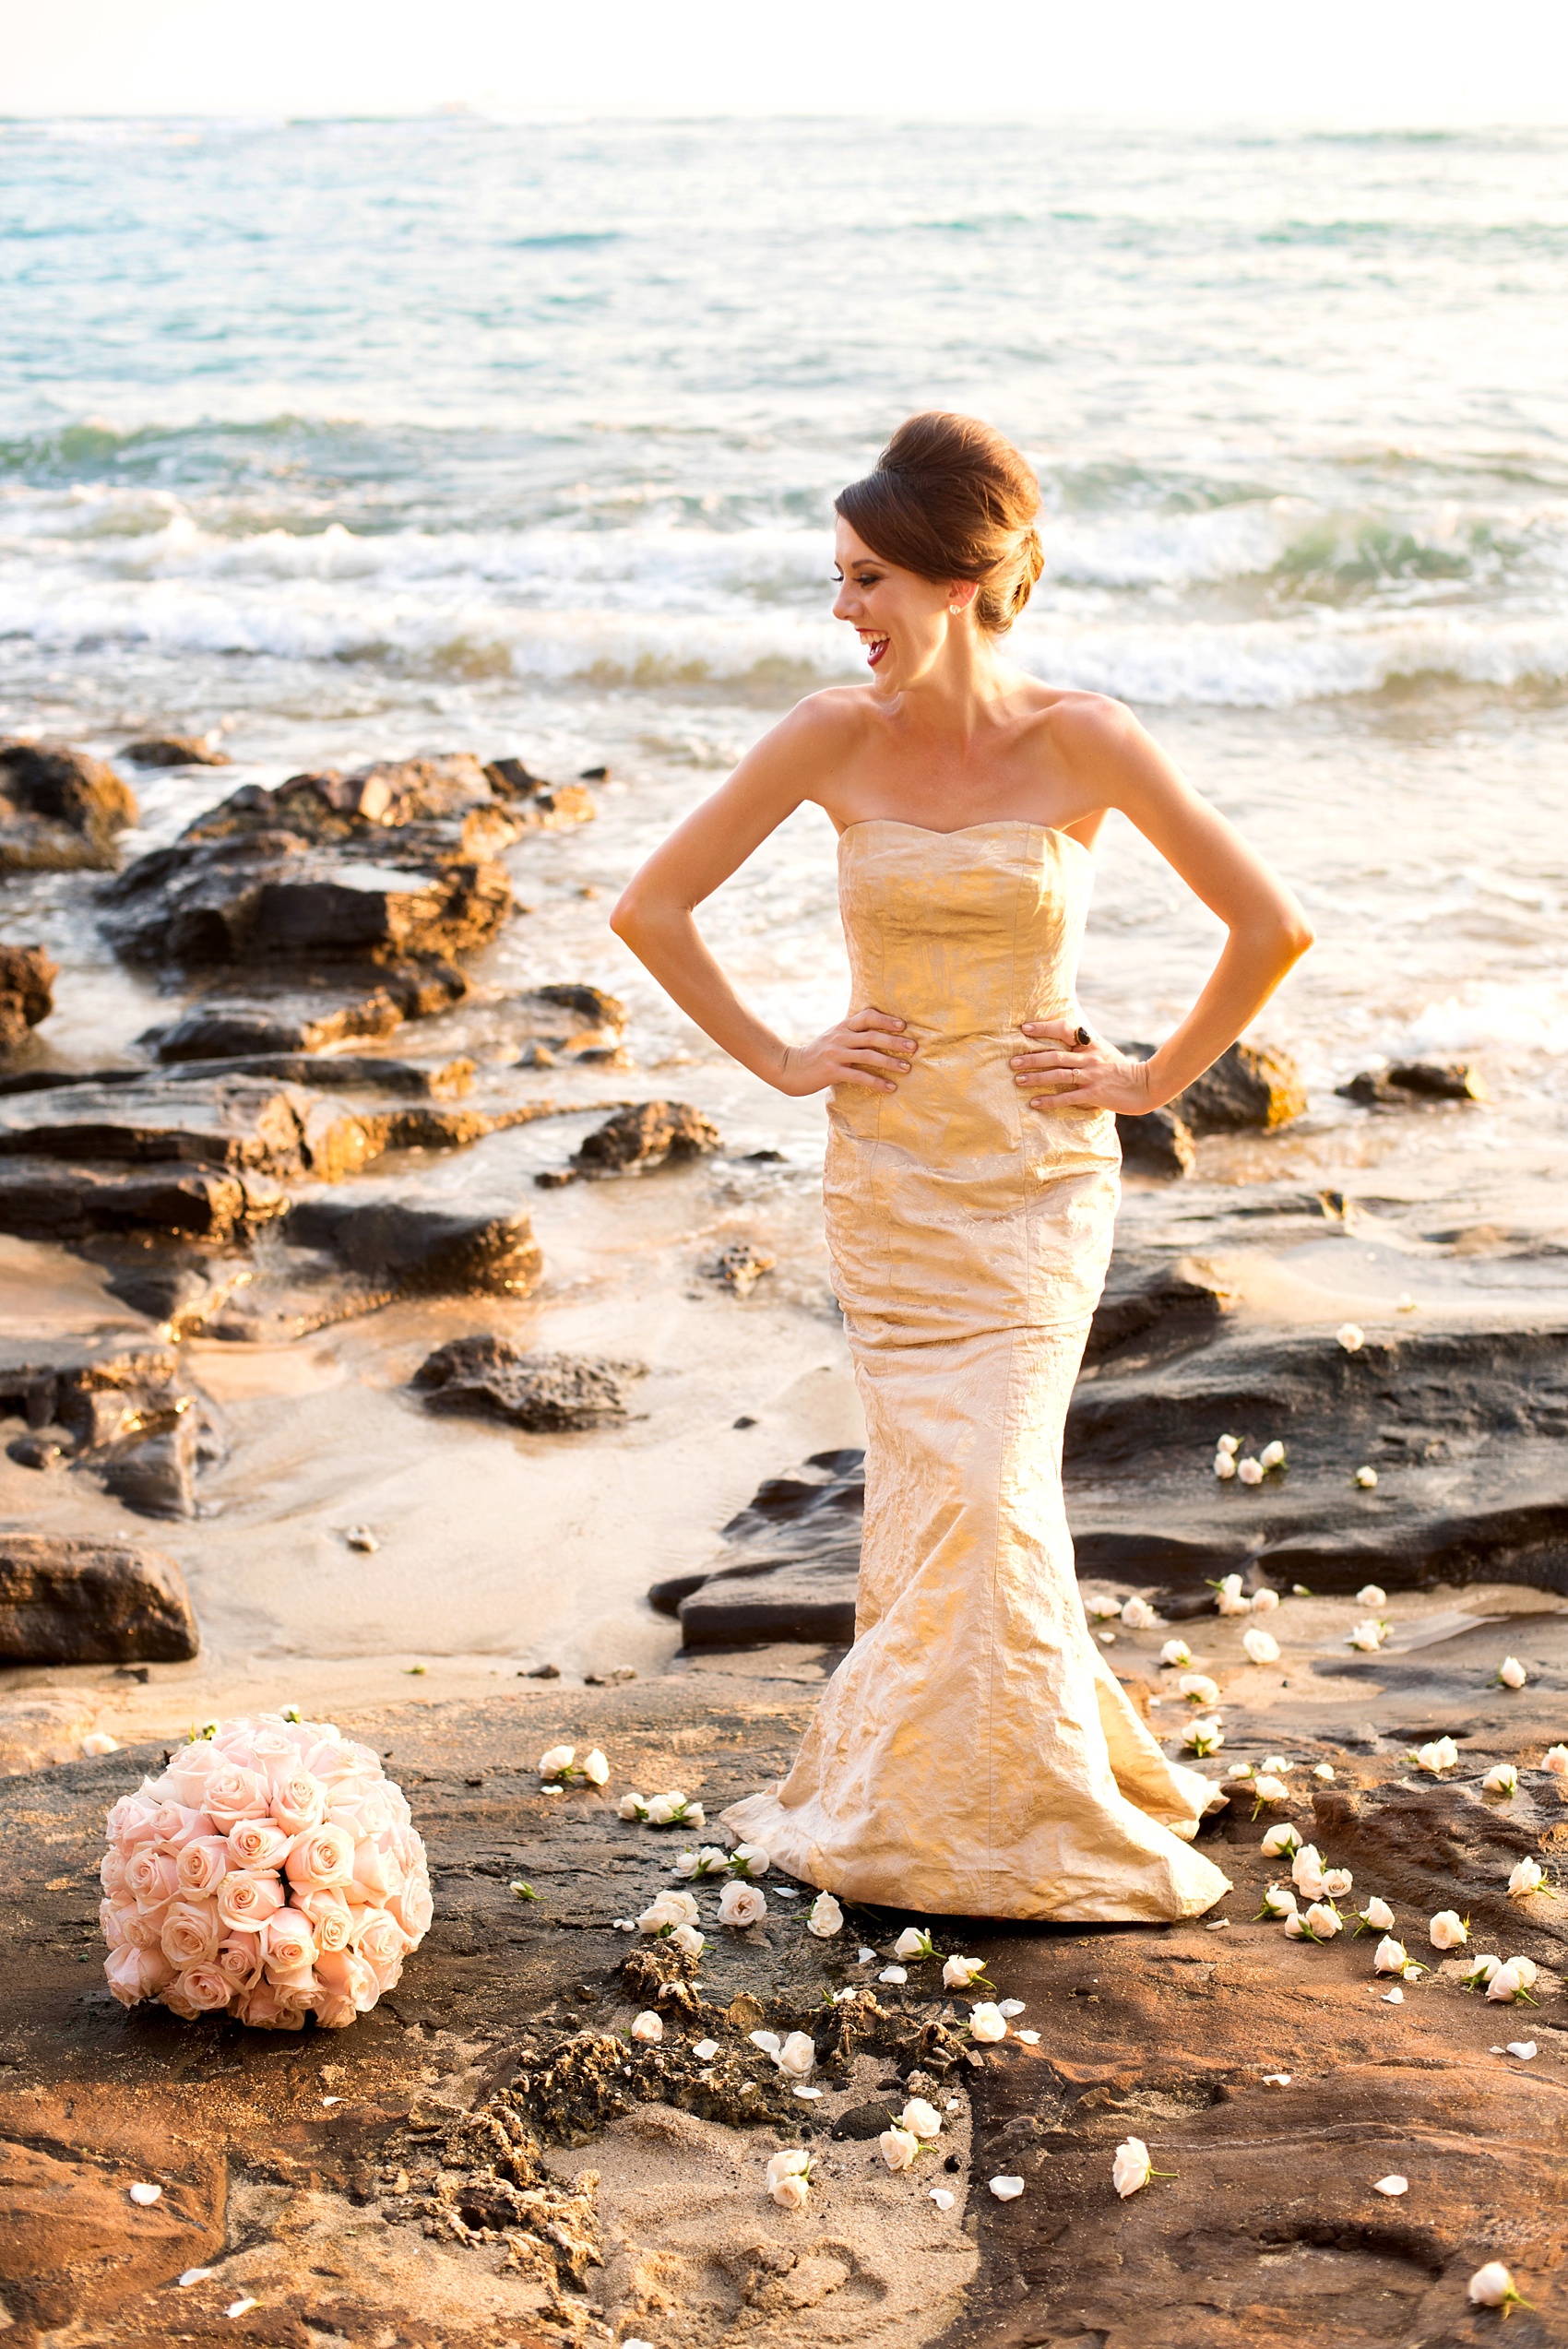 Mikkel Paige Photography photos of a bridal session on beach in Oahu. Golden hour bride with beehive up do, metallic gown and rose pomanders on the lava rock shore.